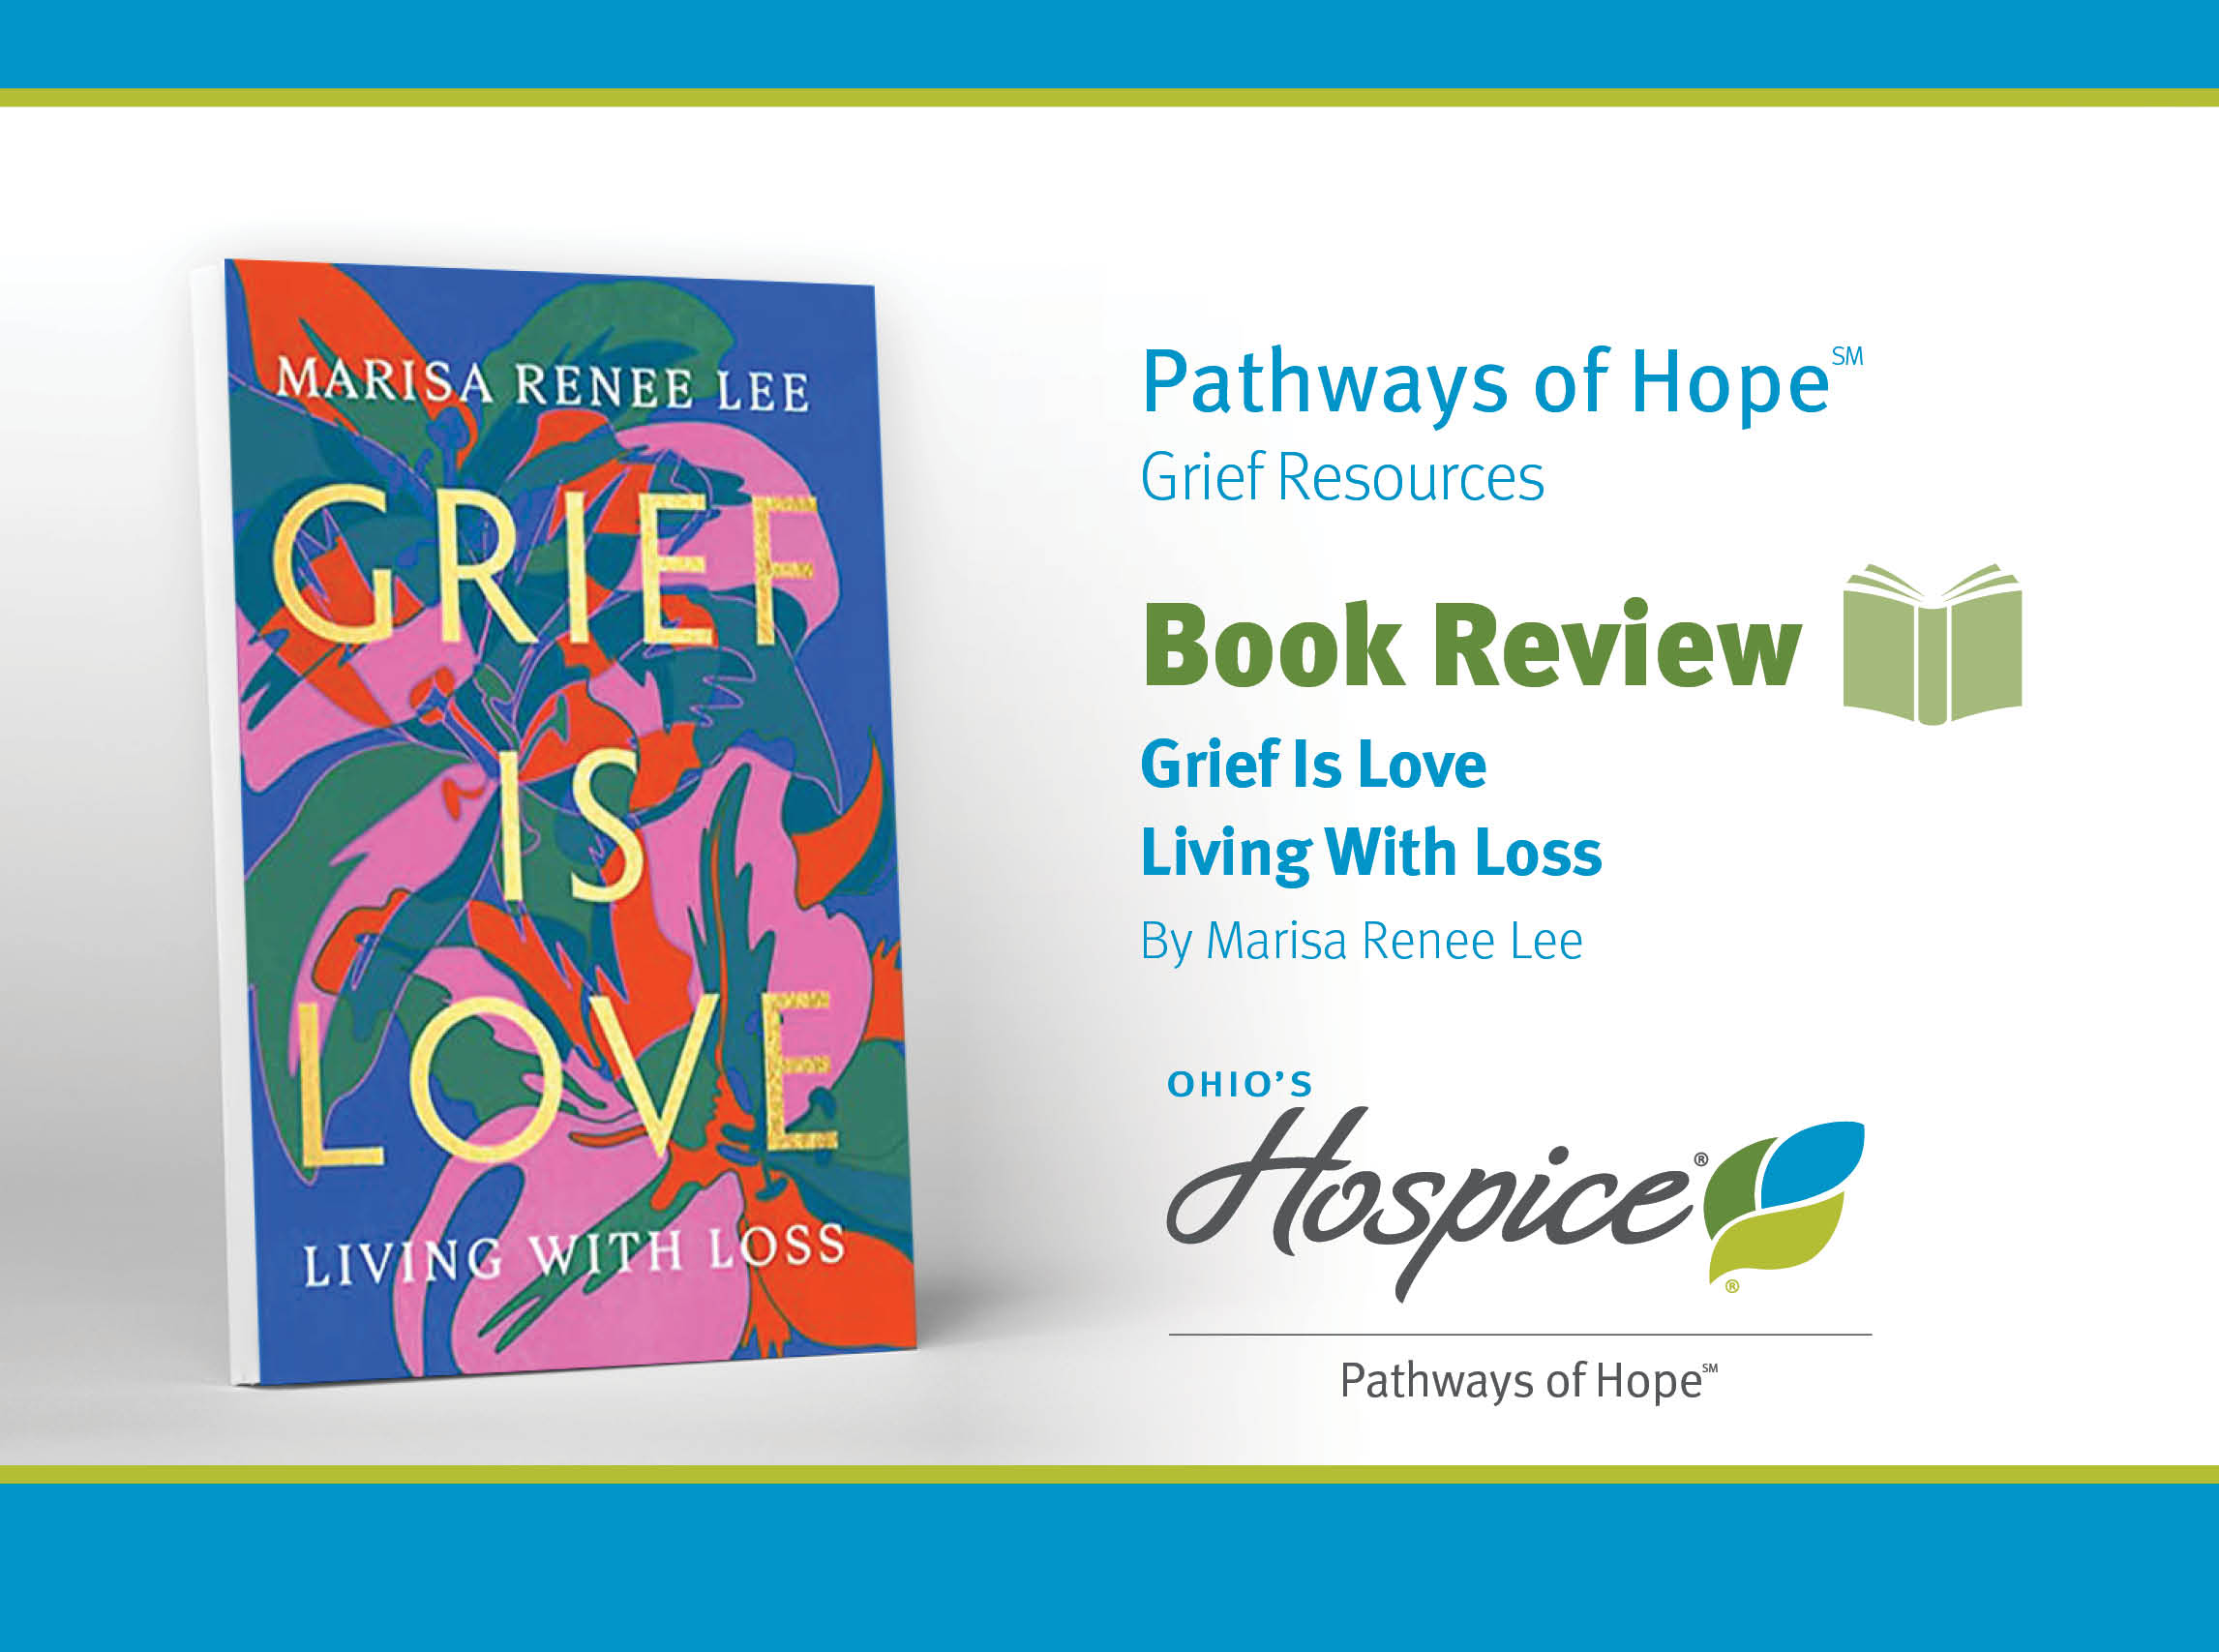 Pathways of Hope Grief Resources. Book Review. Grief Is Love: Living With Loss By Marisa Renee Lee. Ohio's Hospice Pathways of Hope